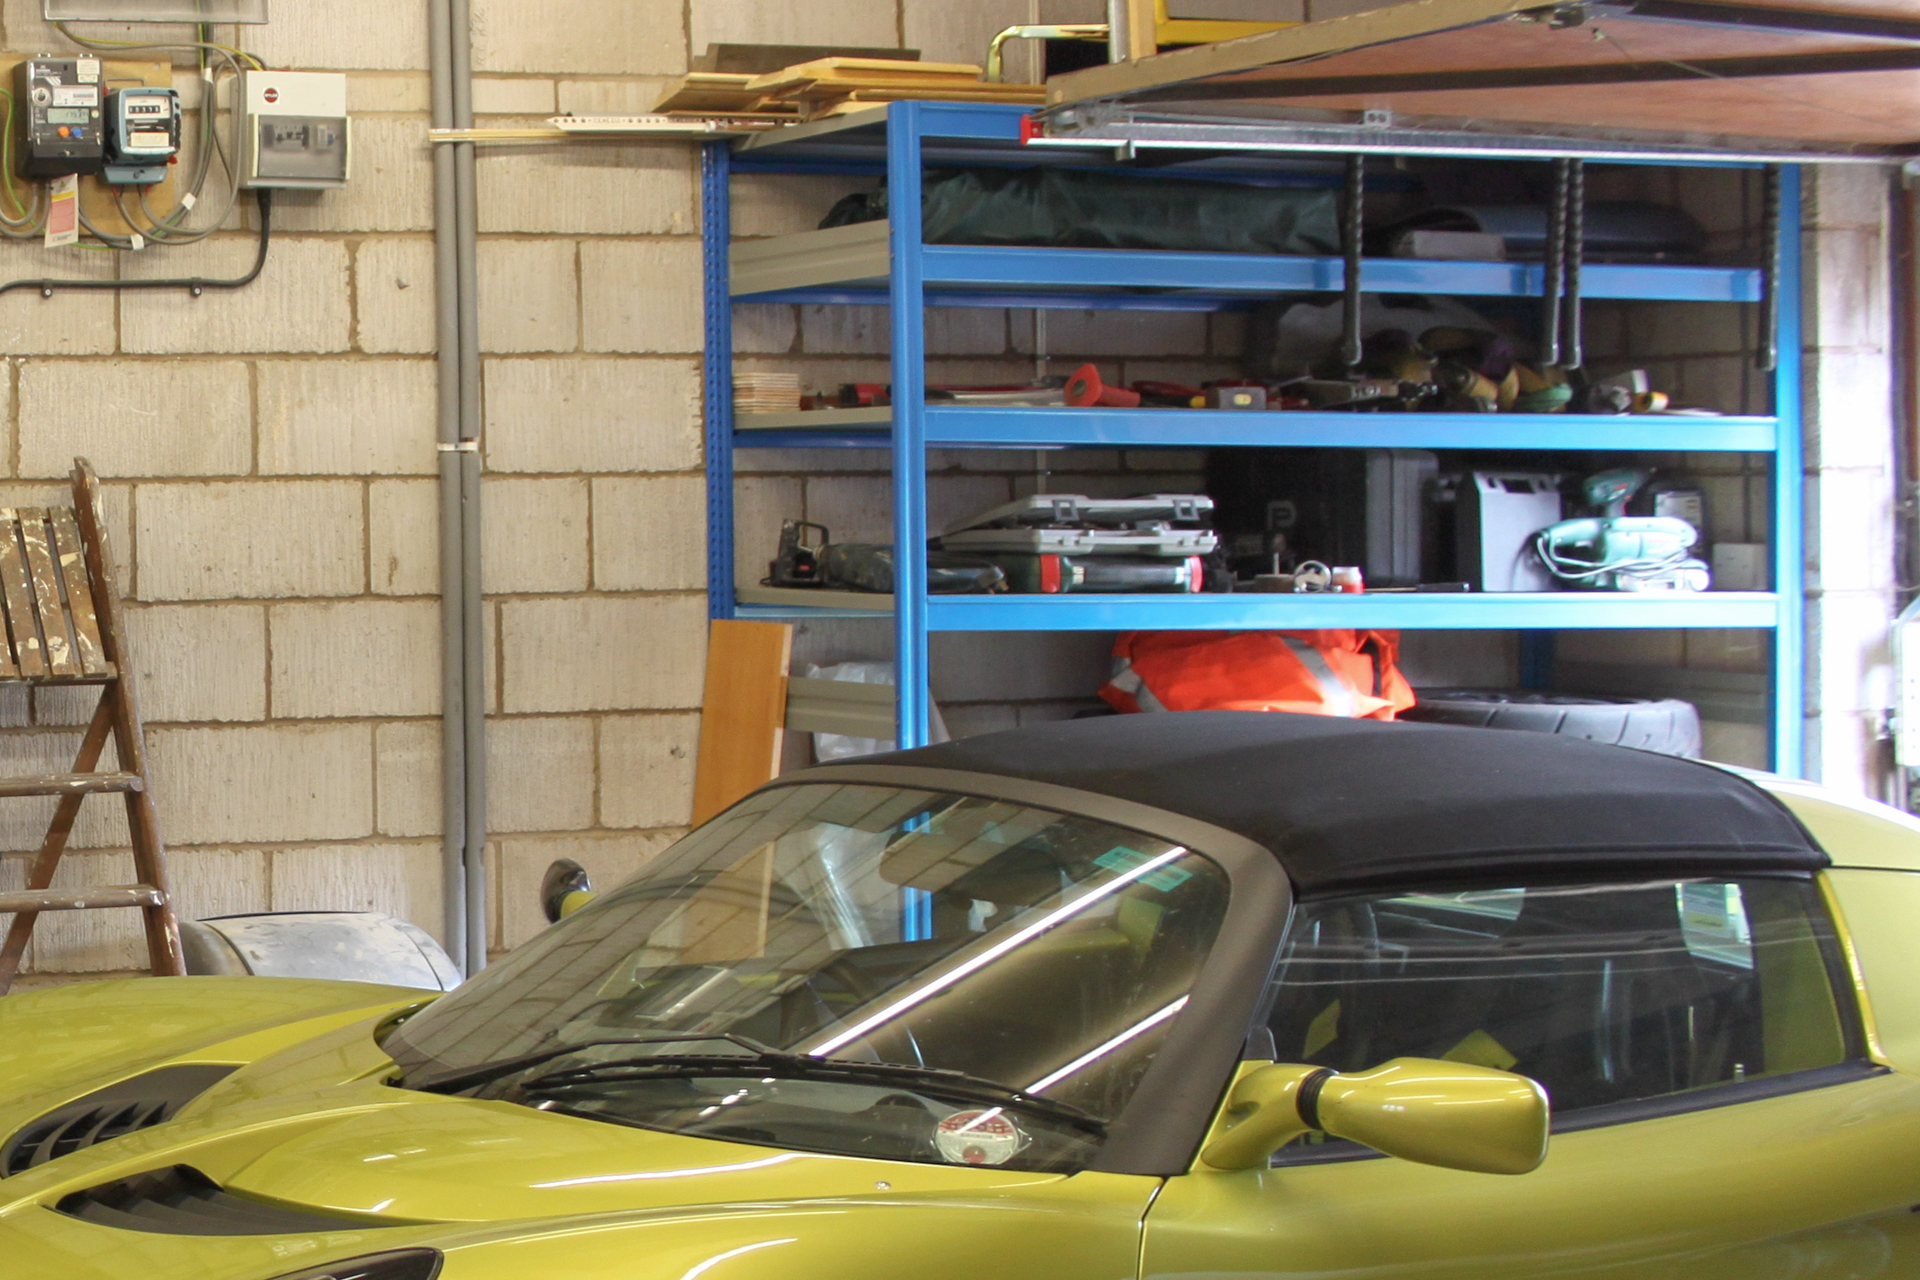 Pistonheads - The image shows a vibrant yellow sports car inside what appears to be a garage or workshop. The car is parked and the interior of the vehicle is visible, featuring black upholstery on the seats and dashboard. In the background, there's an array of other vehicles and equipment, suggesting a space dedicated to automotive maintenance or repair. There are tools and parts on shelves and workbenches, indicating that this is not only a storage space for vehicles but also an active workspace. The setting appears to be a professional environment, possibly in a shop specializing in exotic or luxury cars.